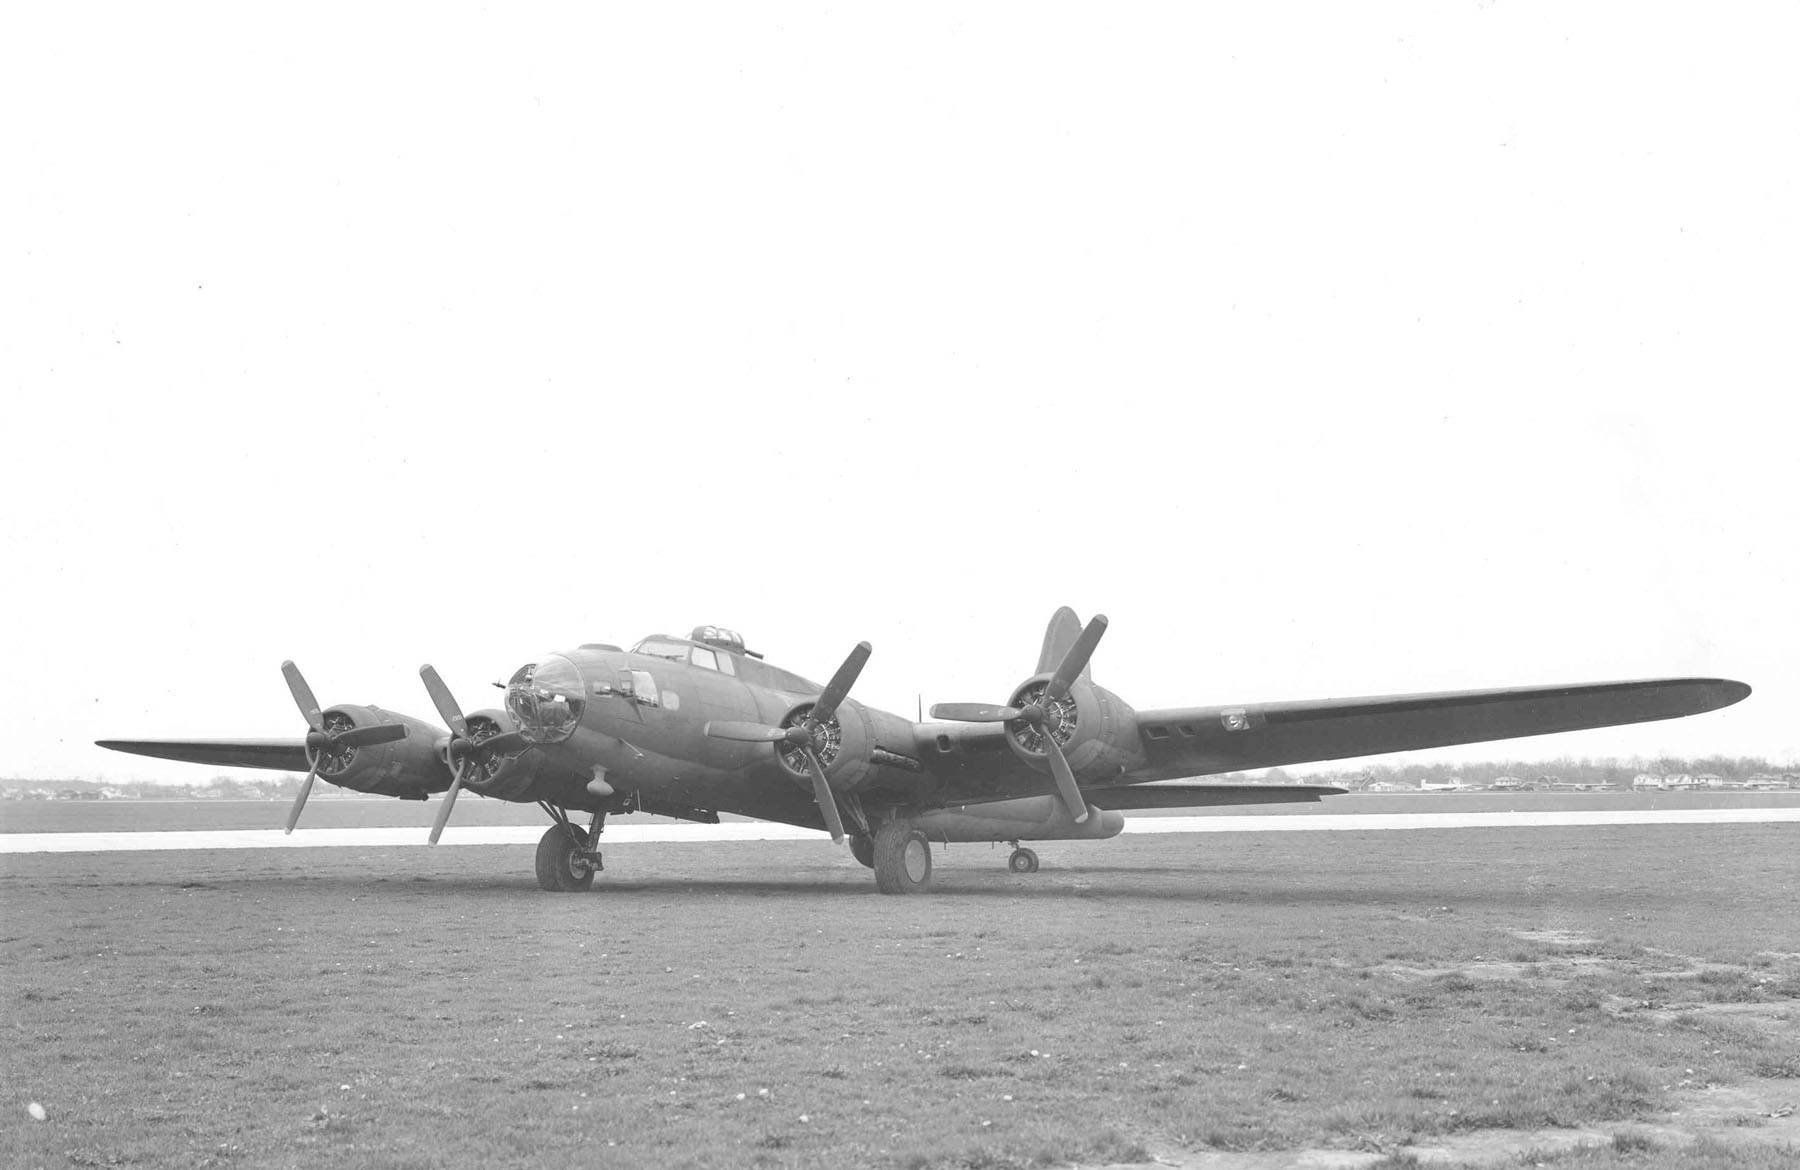 Boeing B-17F Flying Fortress. (U.S. Air Force)